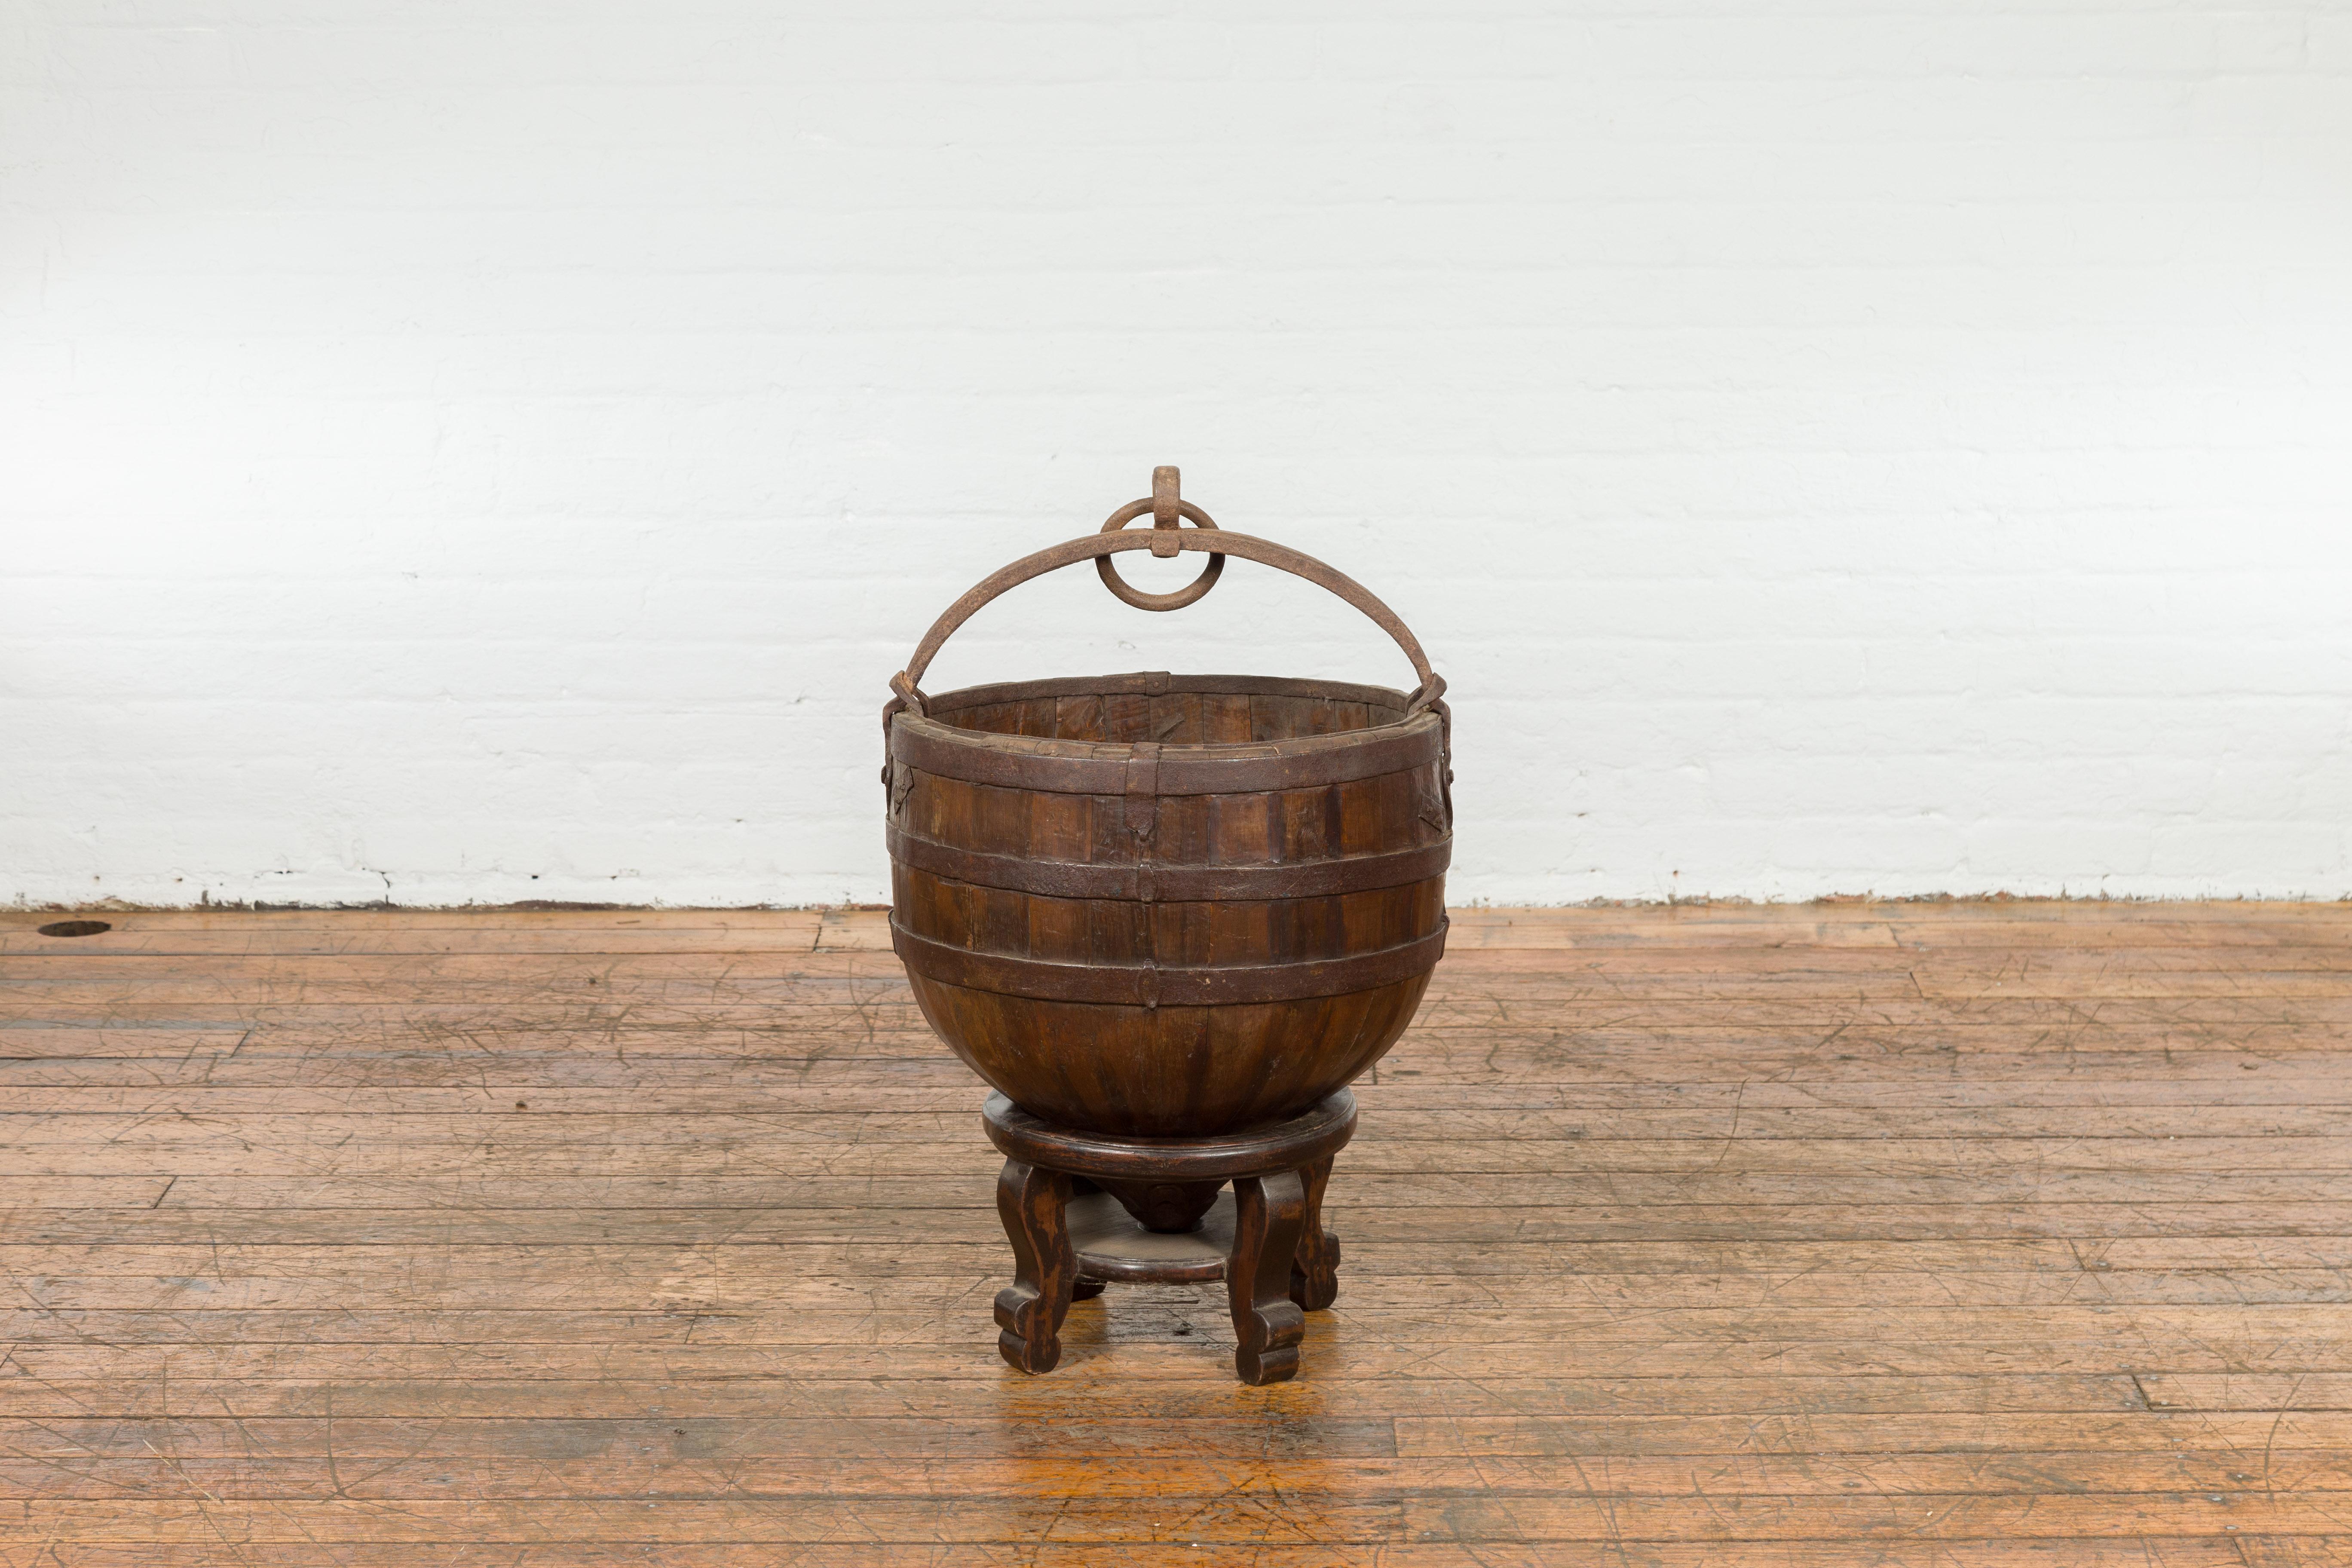 A rustic Chinese Qing Dynasty period wooden rice bucket from the 19th century, with circular shape, iron handle, custom carved stand and weathered appearance. Created in China during the Qing Dynasty period in the 19th century, this rice bucket has